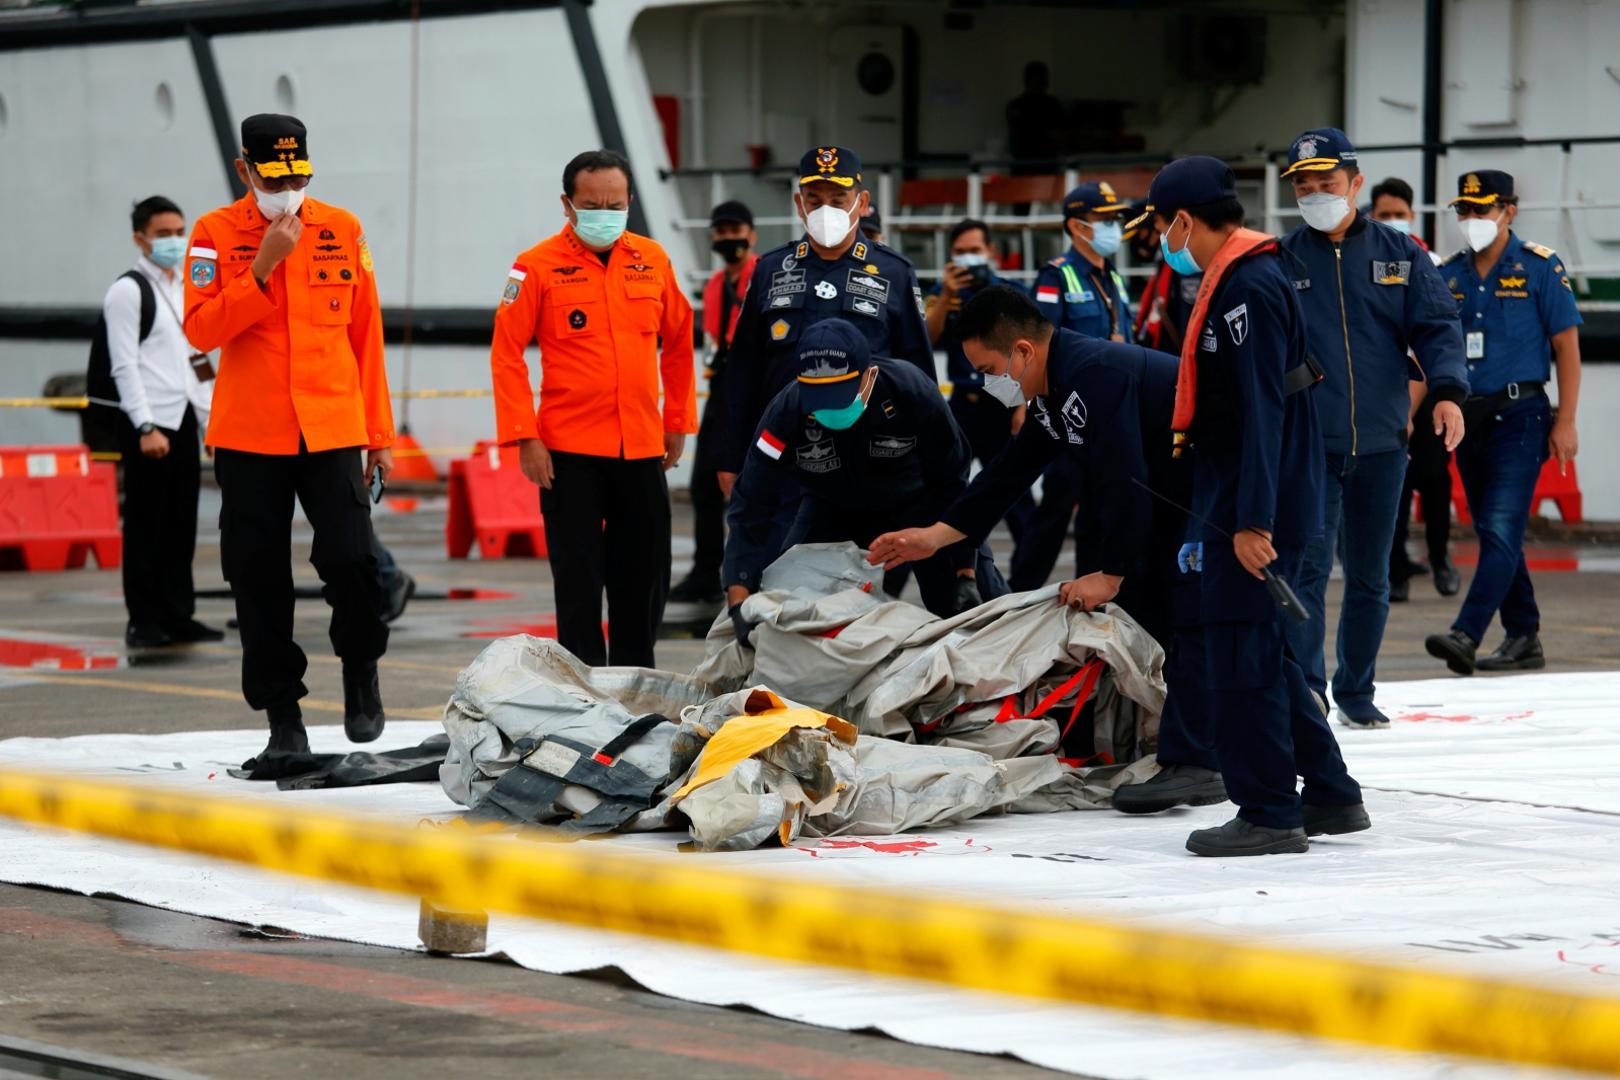 Indonesian rescue members carry what is believed to be the remains of the Sriwijaya Air plane flight SJ 182 which crashed into the sea, at Jakarta International Container Terminal port in Jakarta Indonesian rescue members carry what is believed to be the remains of the Sriwijaya Air plane flight SJ 182 which crashed into the sea, at Jakarta International Container Terminal port in Jakarta, Indonesia, January 10, 2021. REUTERS/Ajeng Dinar Ulfiana AJENG DINAR ULFIANA